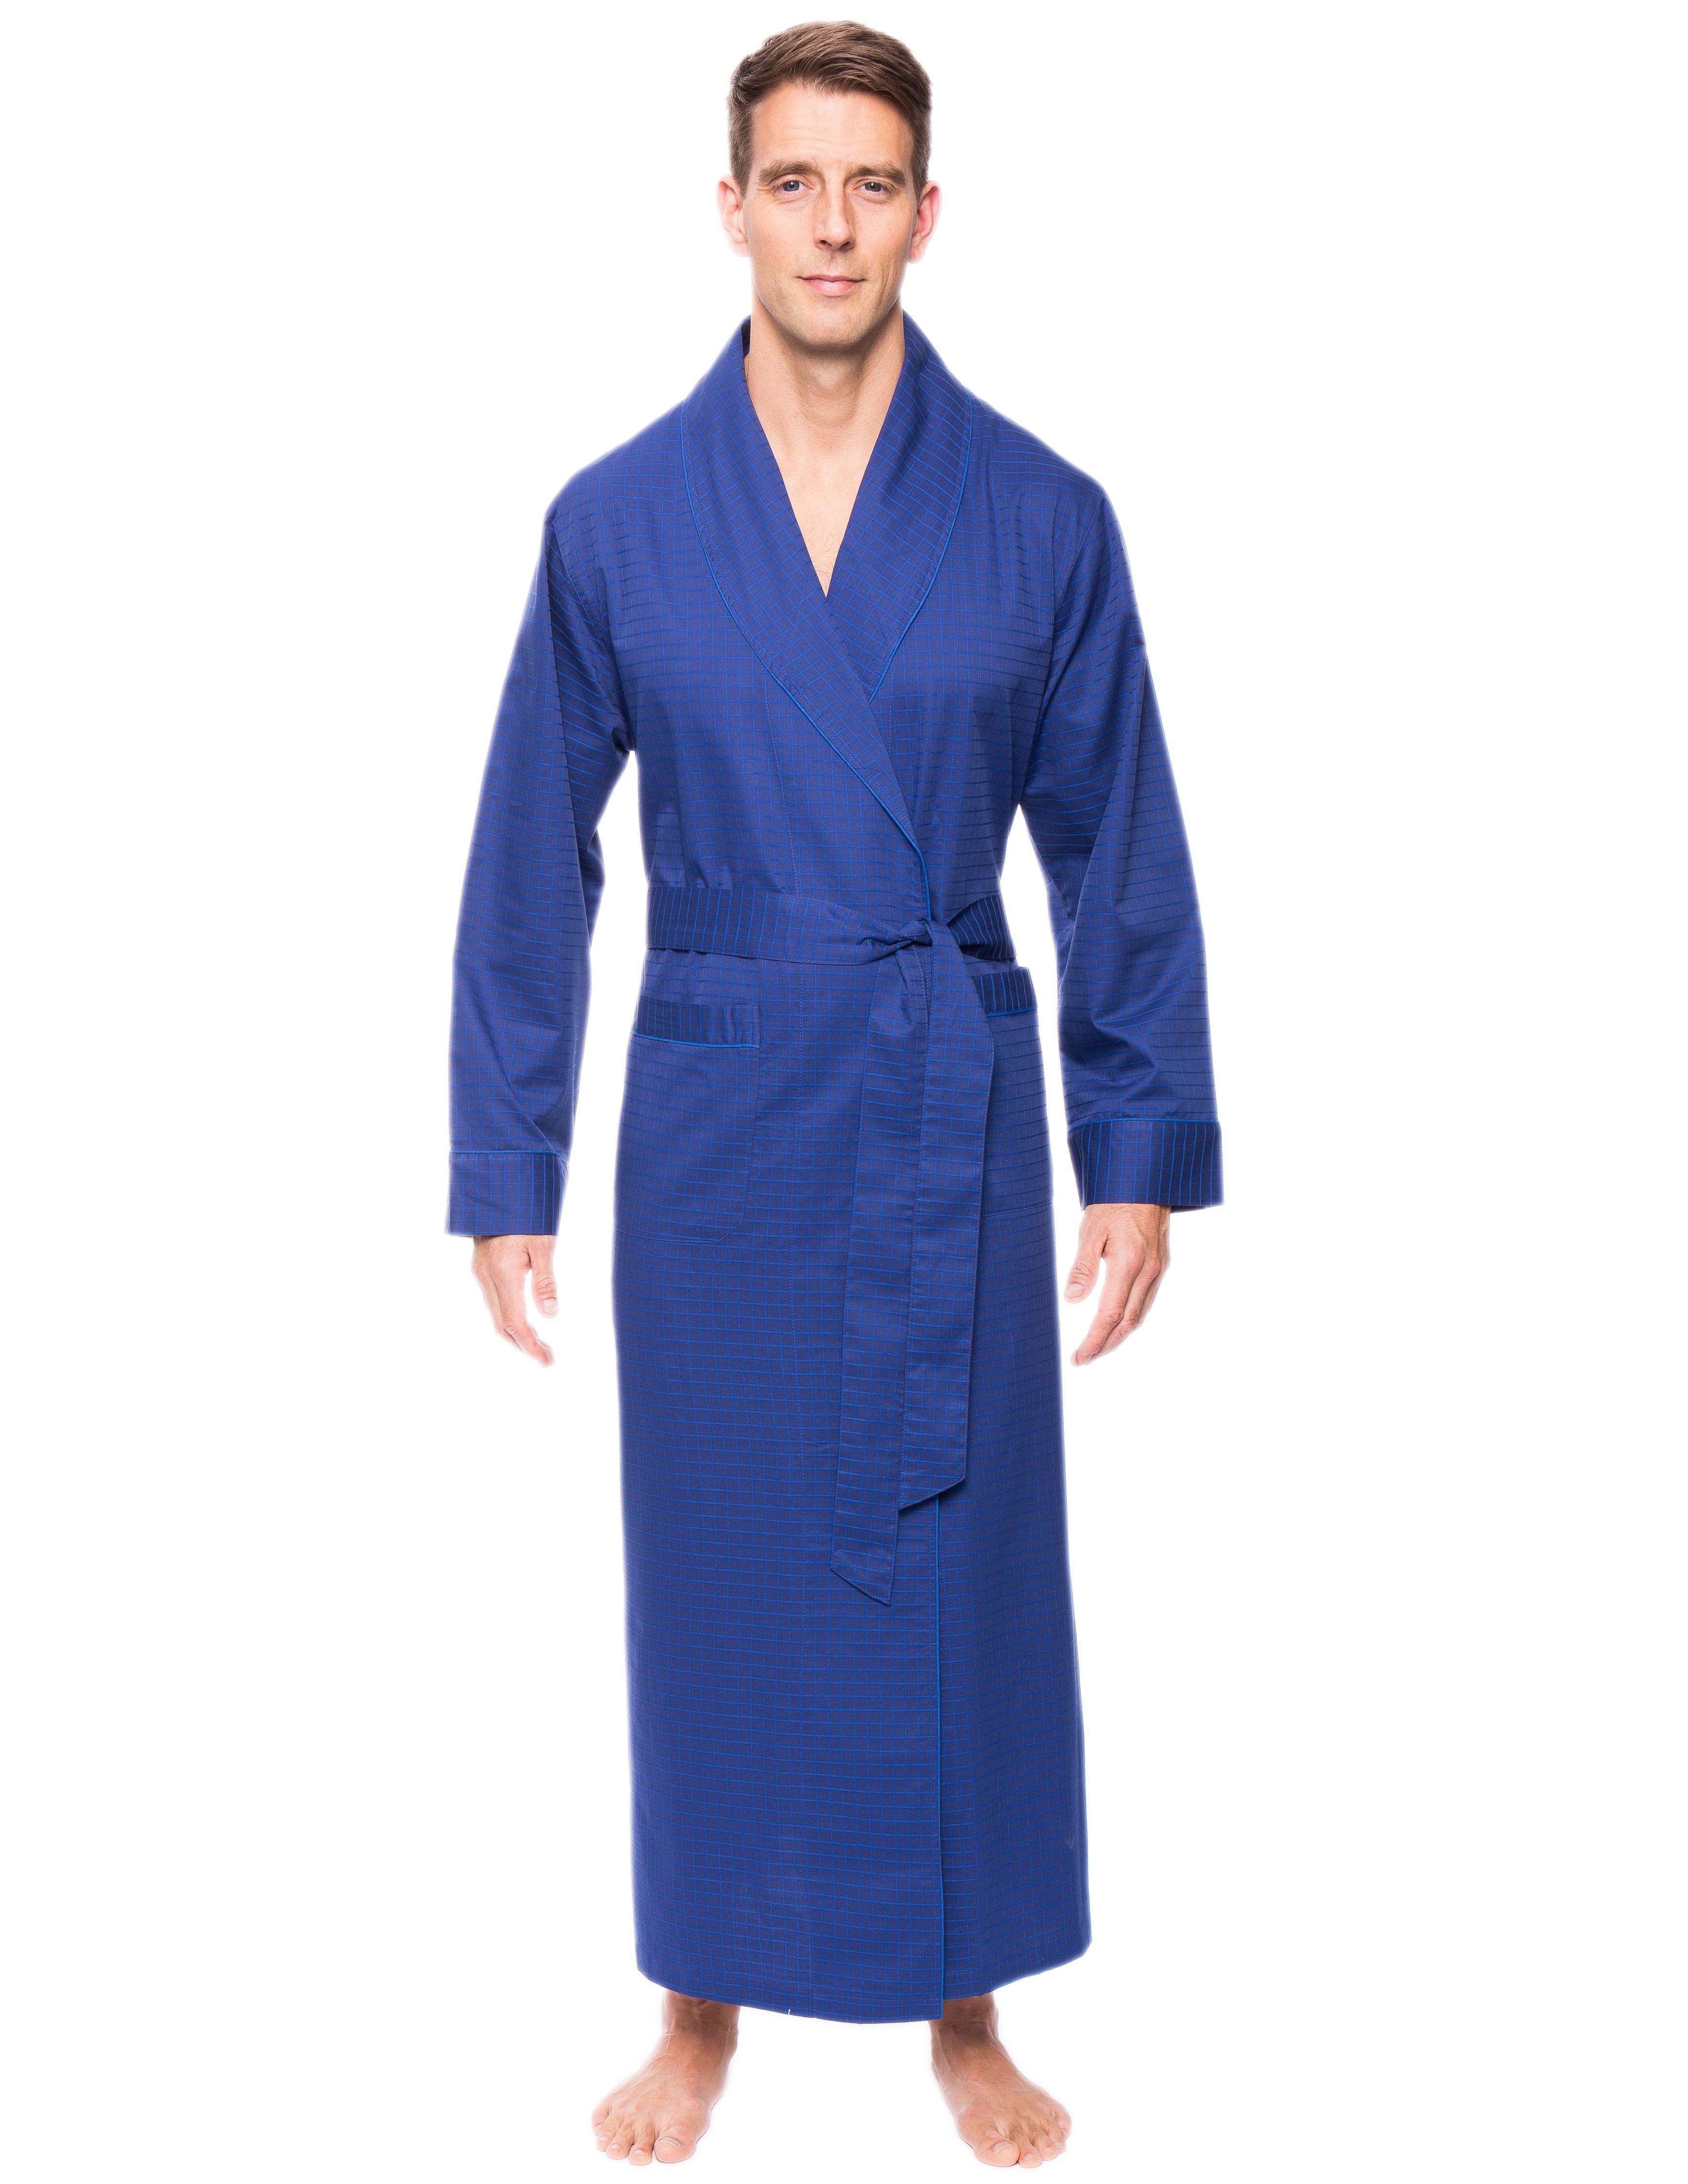 Ross Michaels Mens Robe Plush Big and Tall - Long Fleece Spa Bath Robe with  Pockets - Bathrobe Gift for Men and Teens at Amazon Men's Clothing store